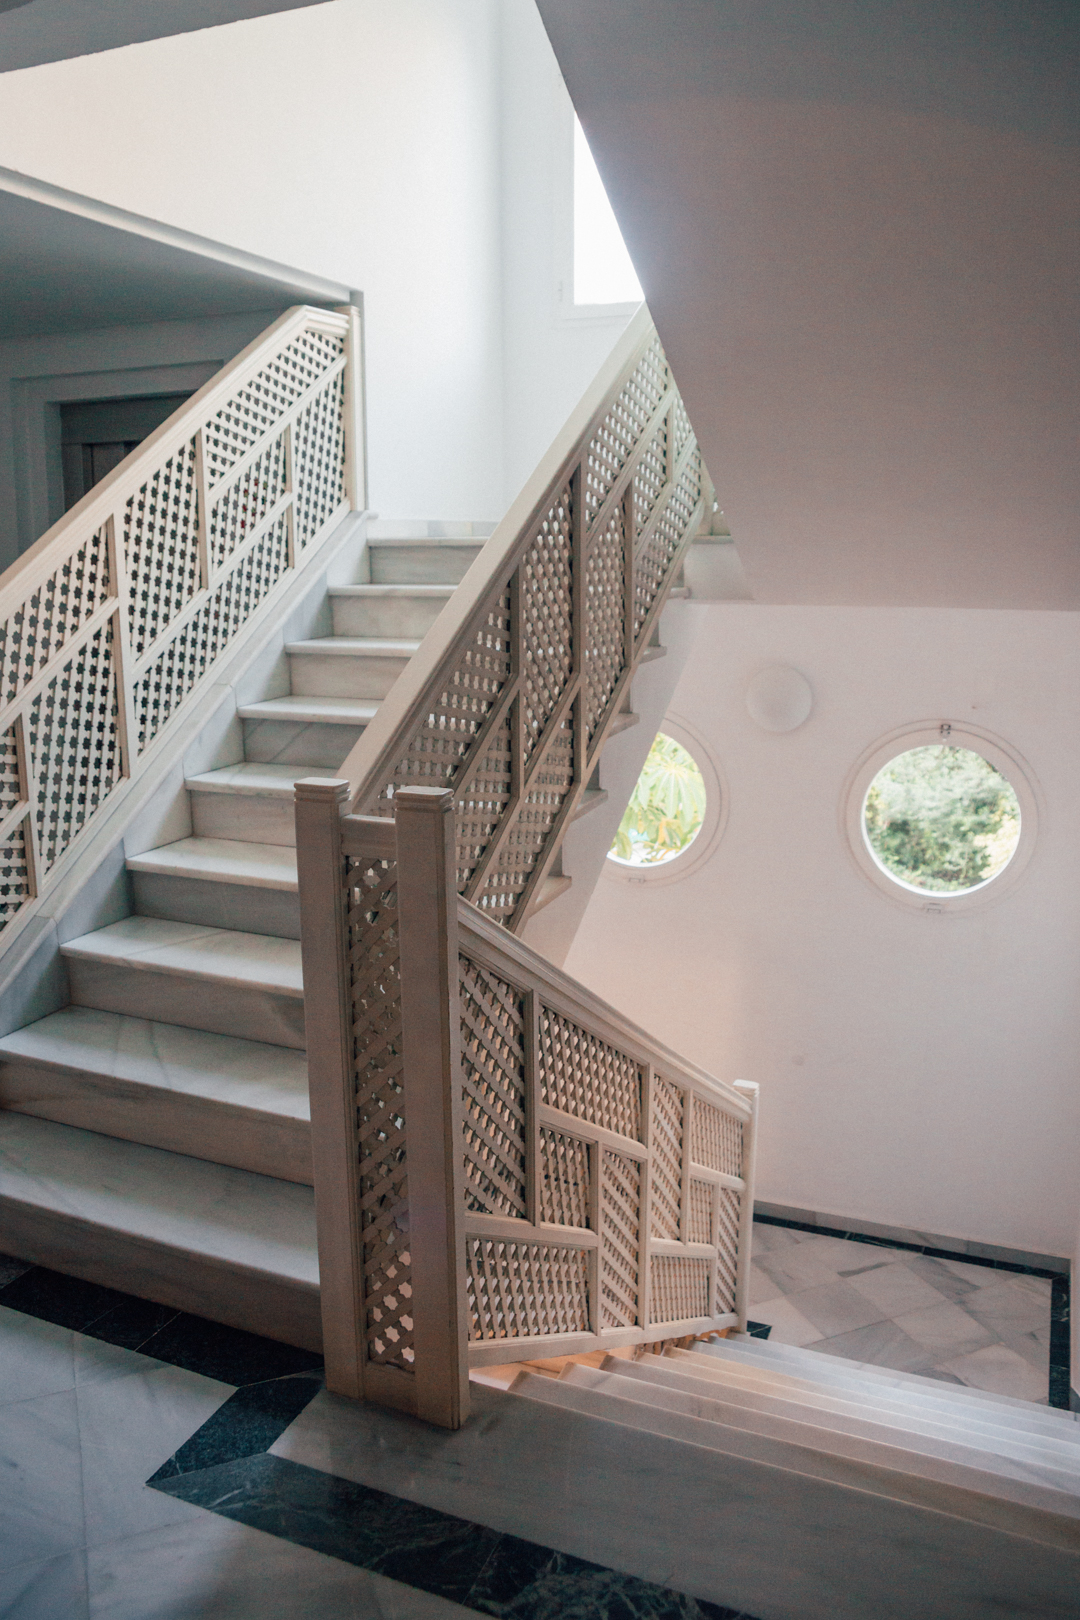 Stairs leading to the rooms, there are also two lifts. Aparthotel Monarch Sultan, Marbella